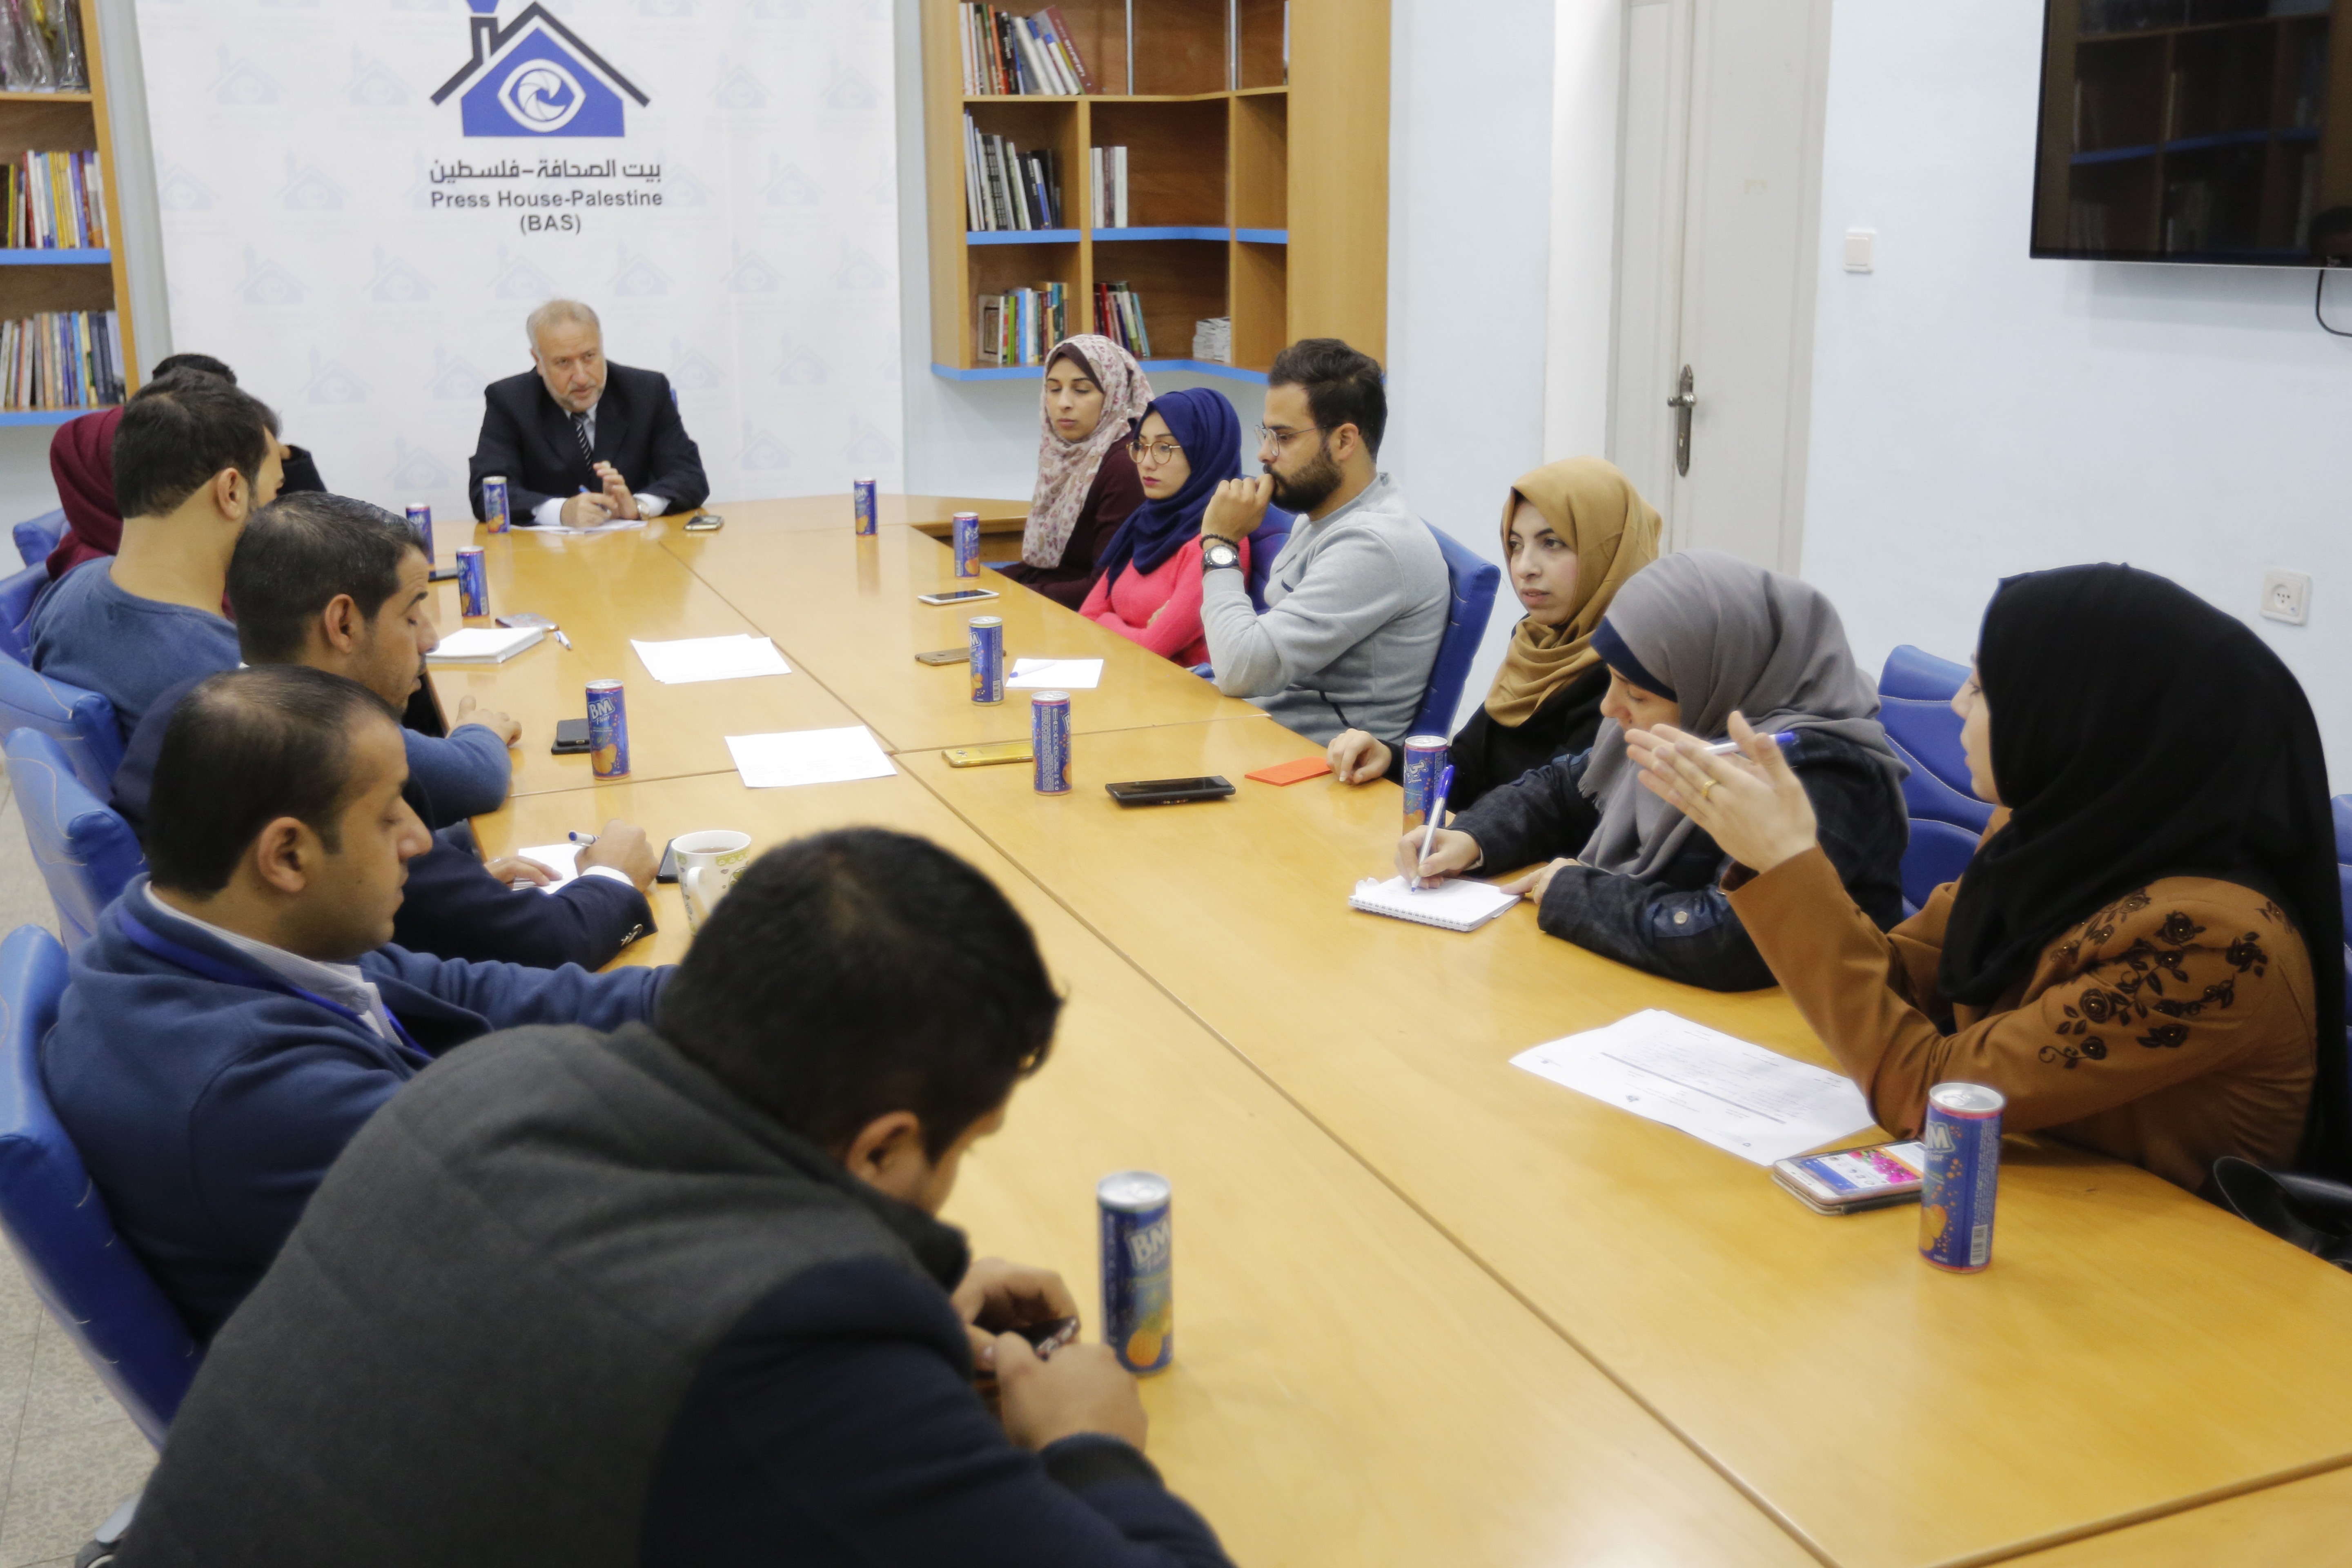  Meeting within the Survey of the Reality of Media in Palestine